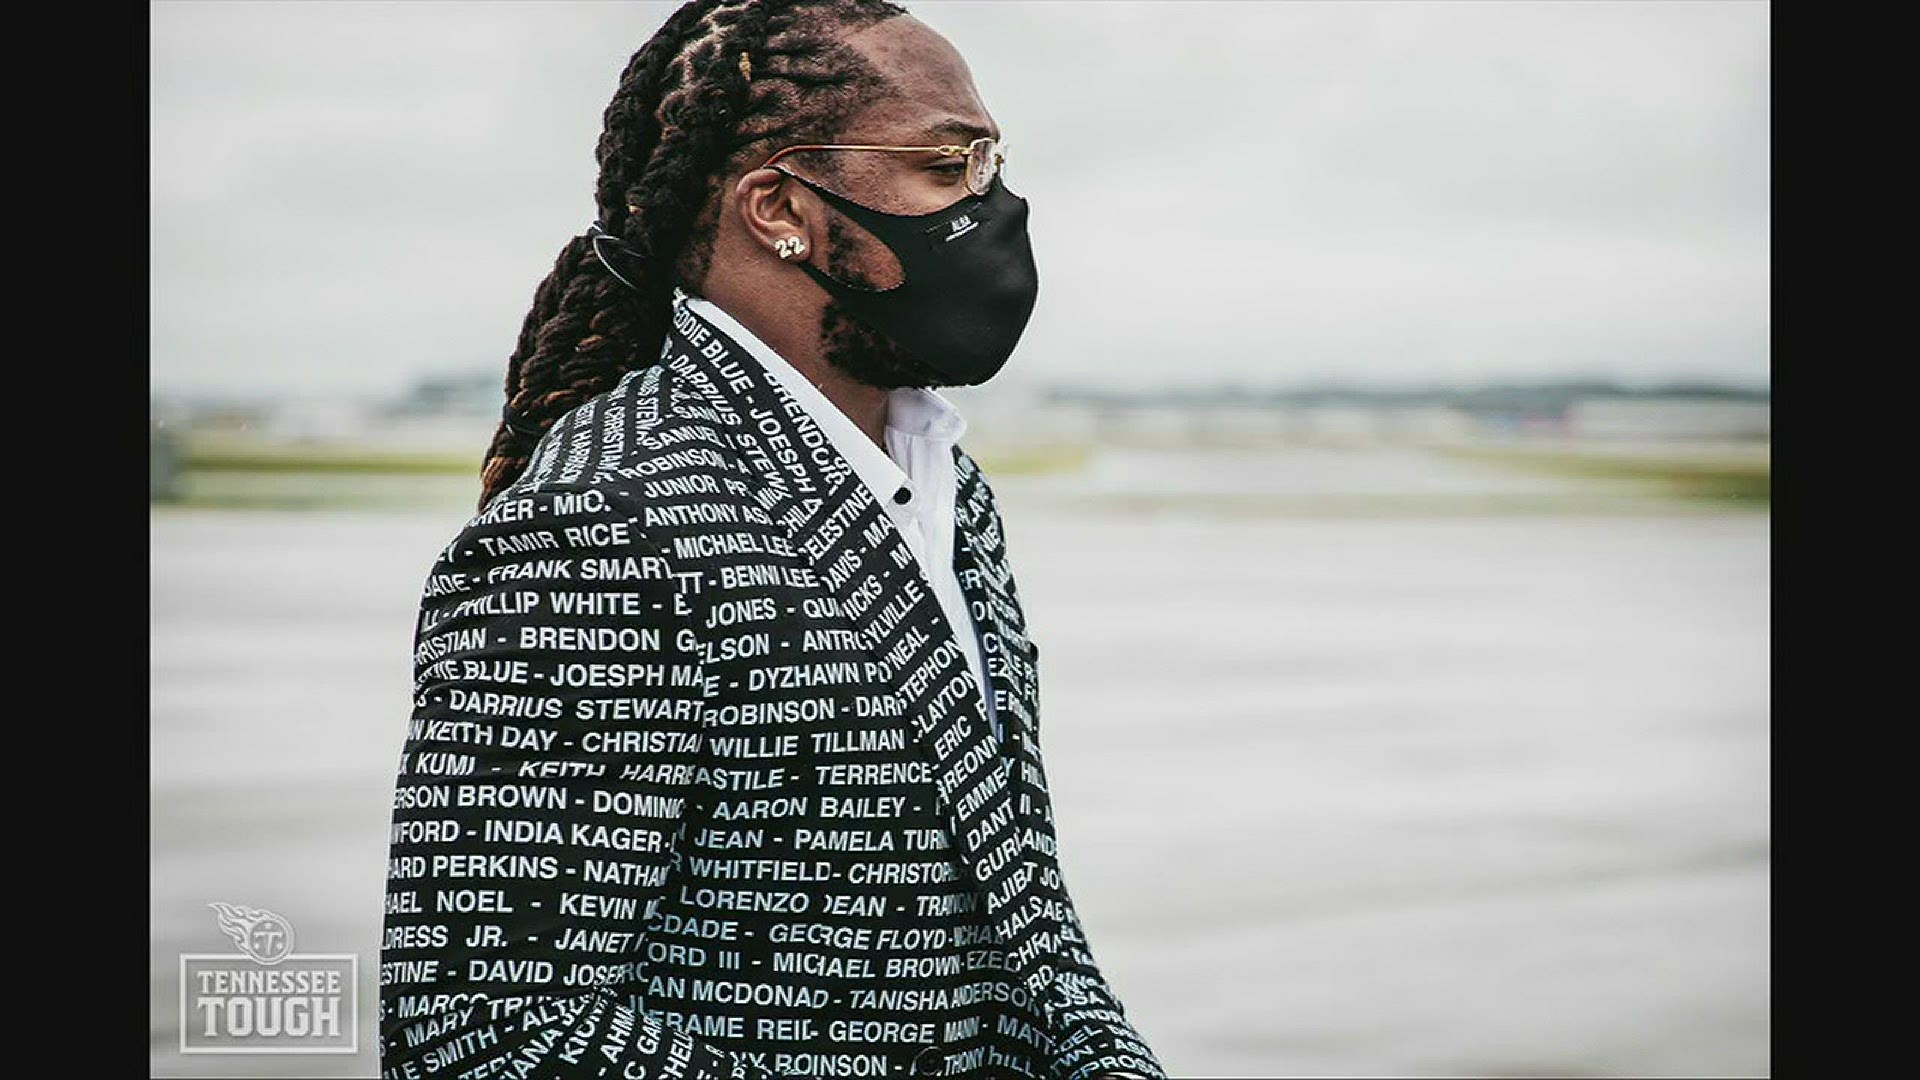 Derrick Henry sported a suit with names honoring victims of racial